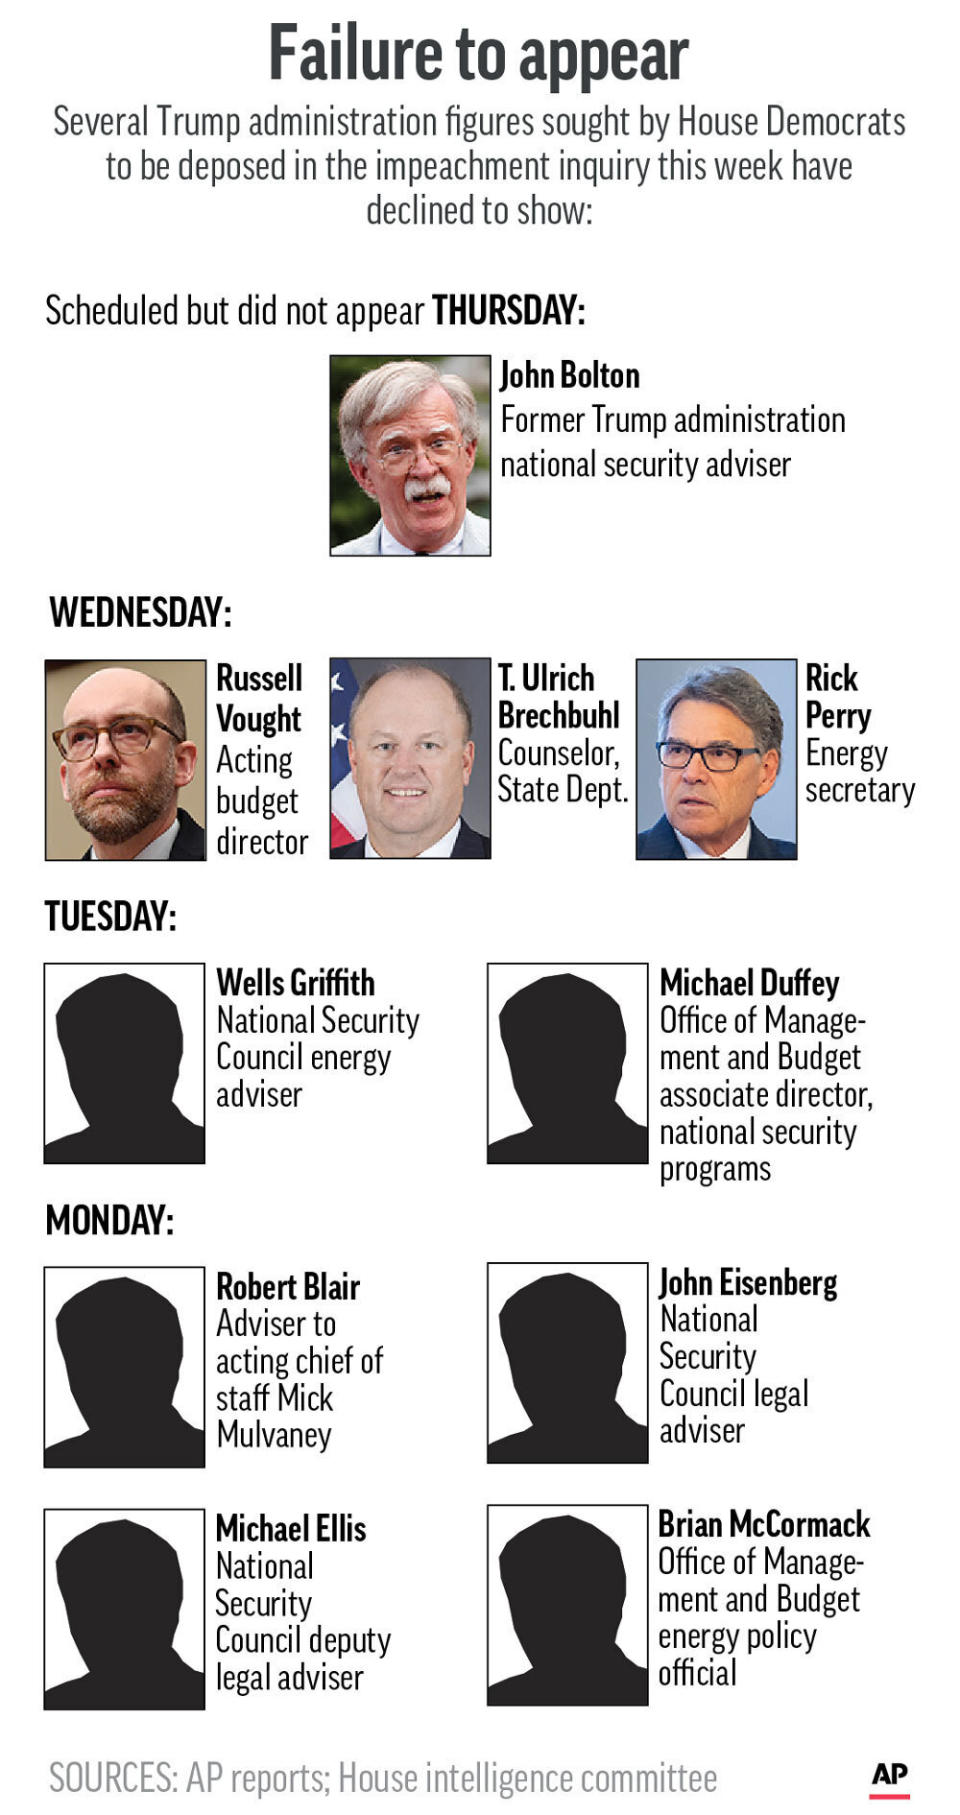 Witnesses who have not shown up this week at congressional impeachment hearings;